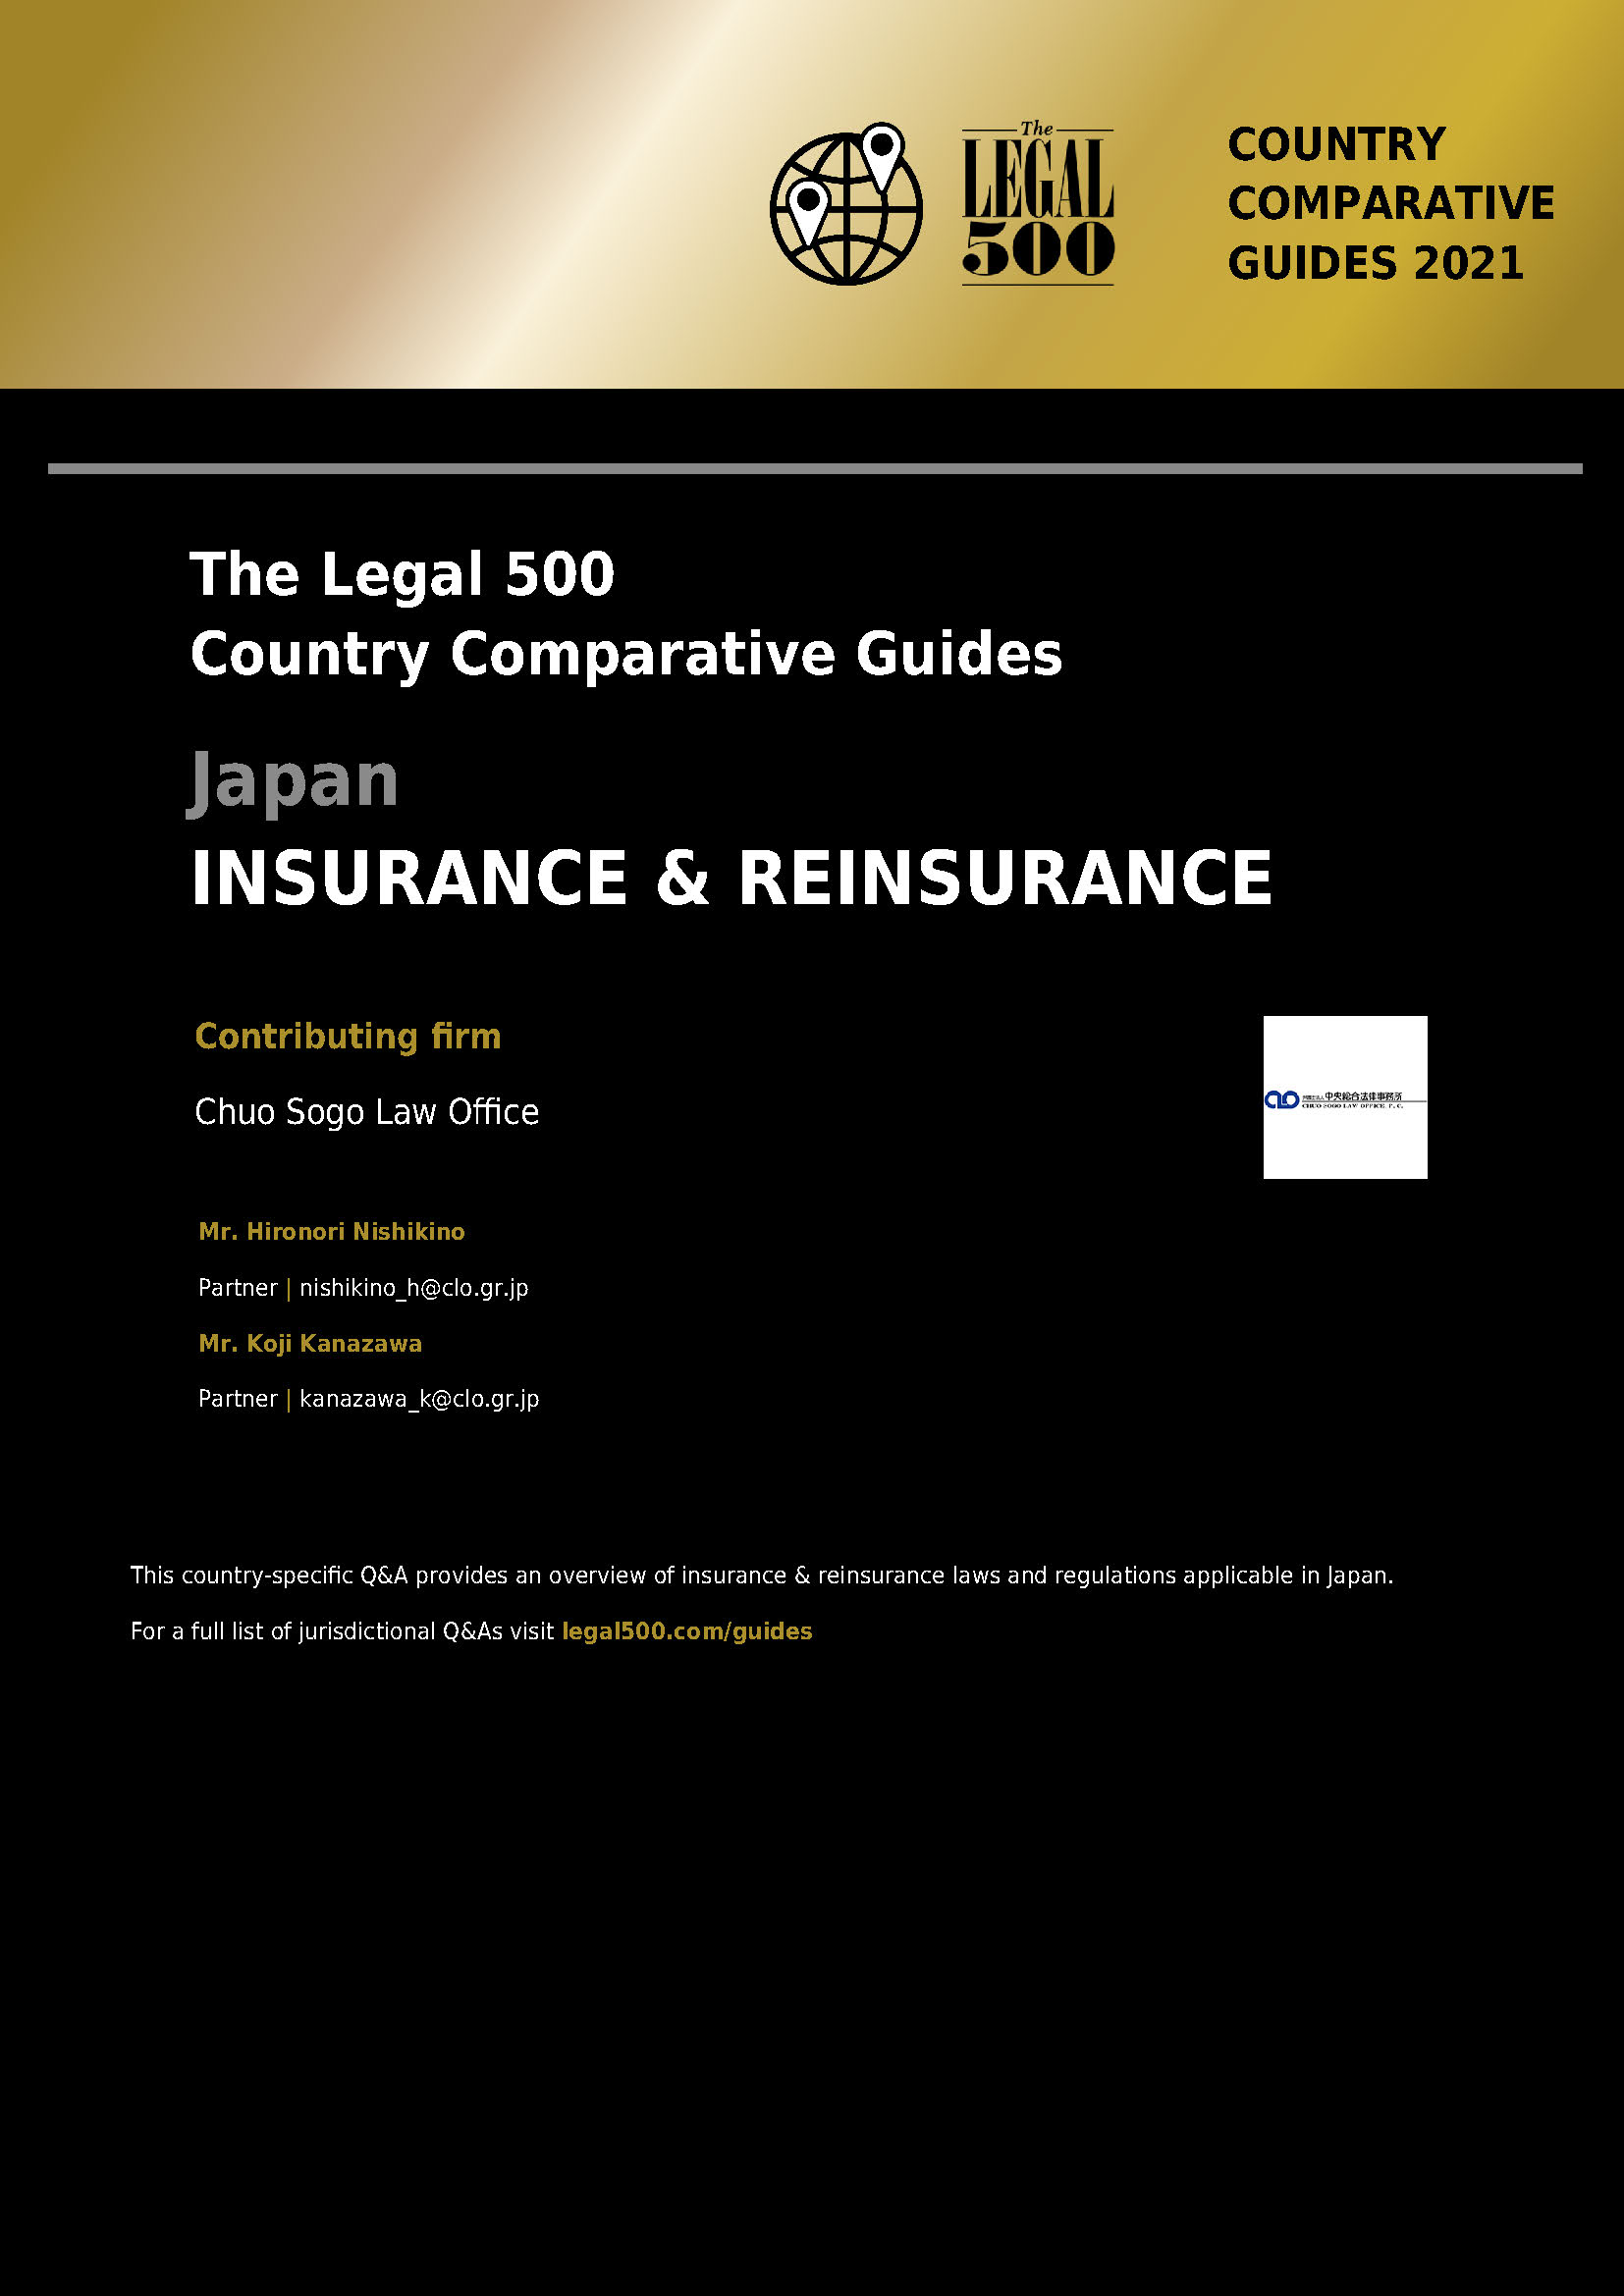 The Legal 500: 5th Edition Insurance & Reinsurance Comparative Guide